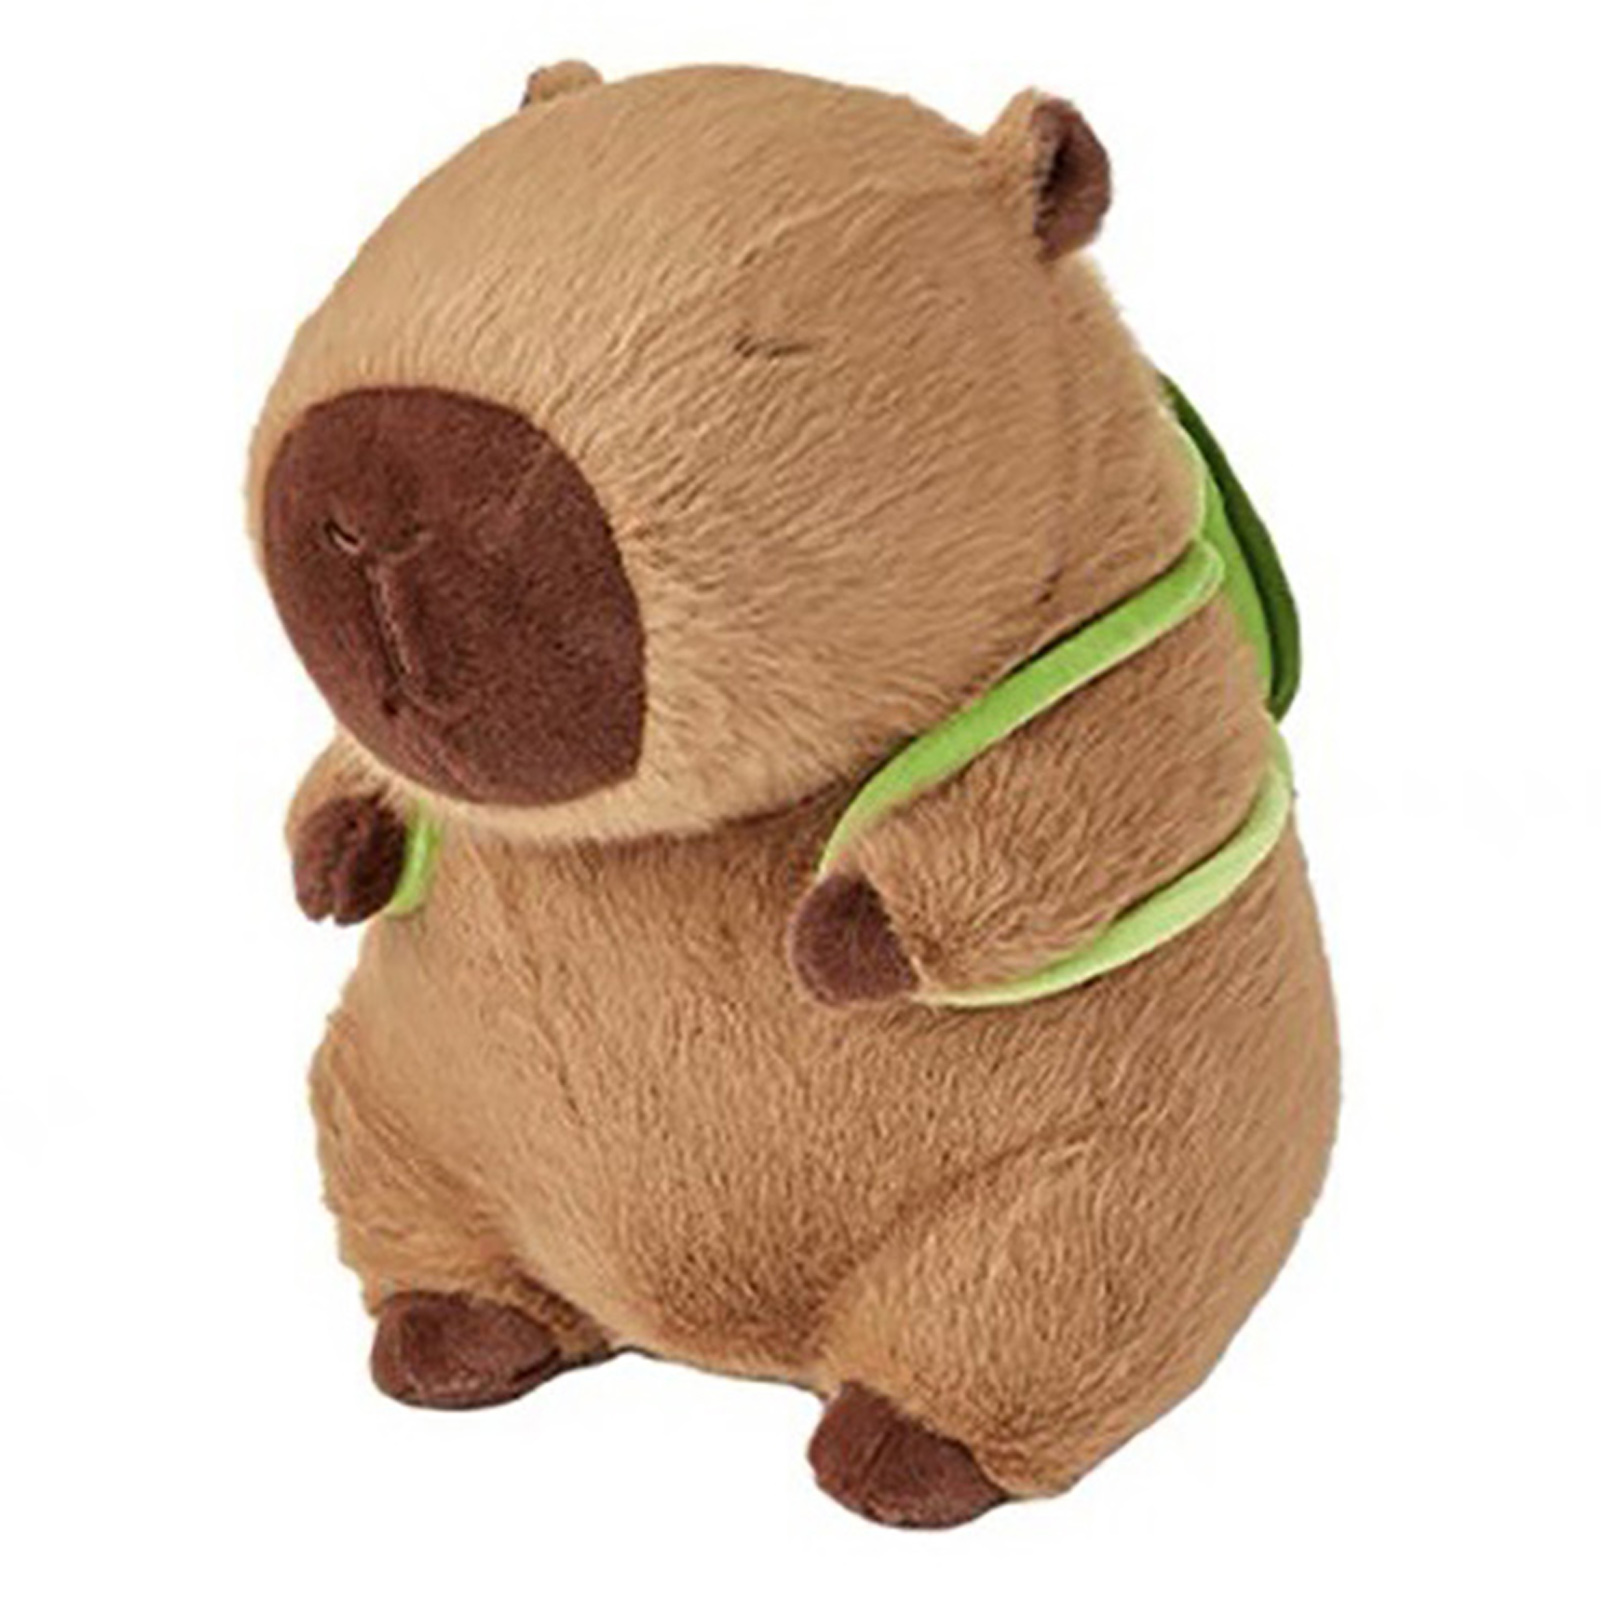 Adventure Toy Pp Cotton Stuffed Toy Super Soft Capybara Plush Toy with